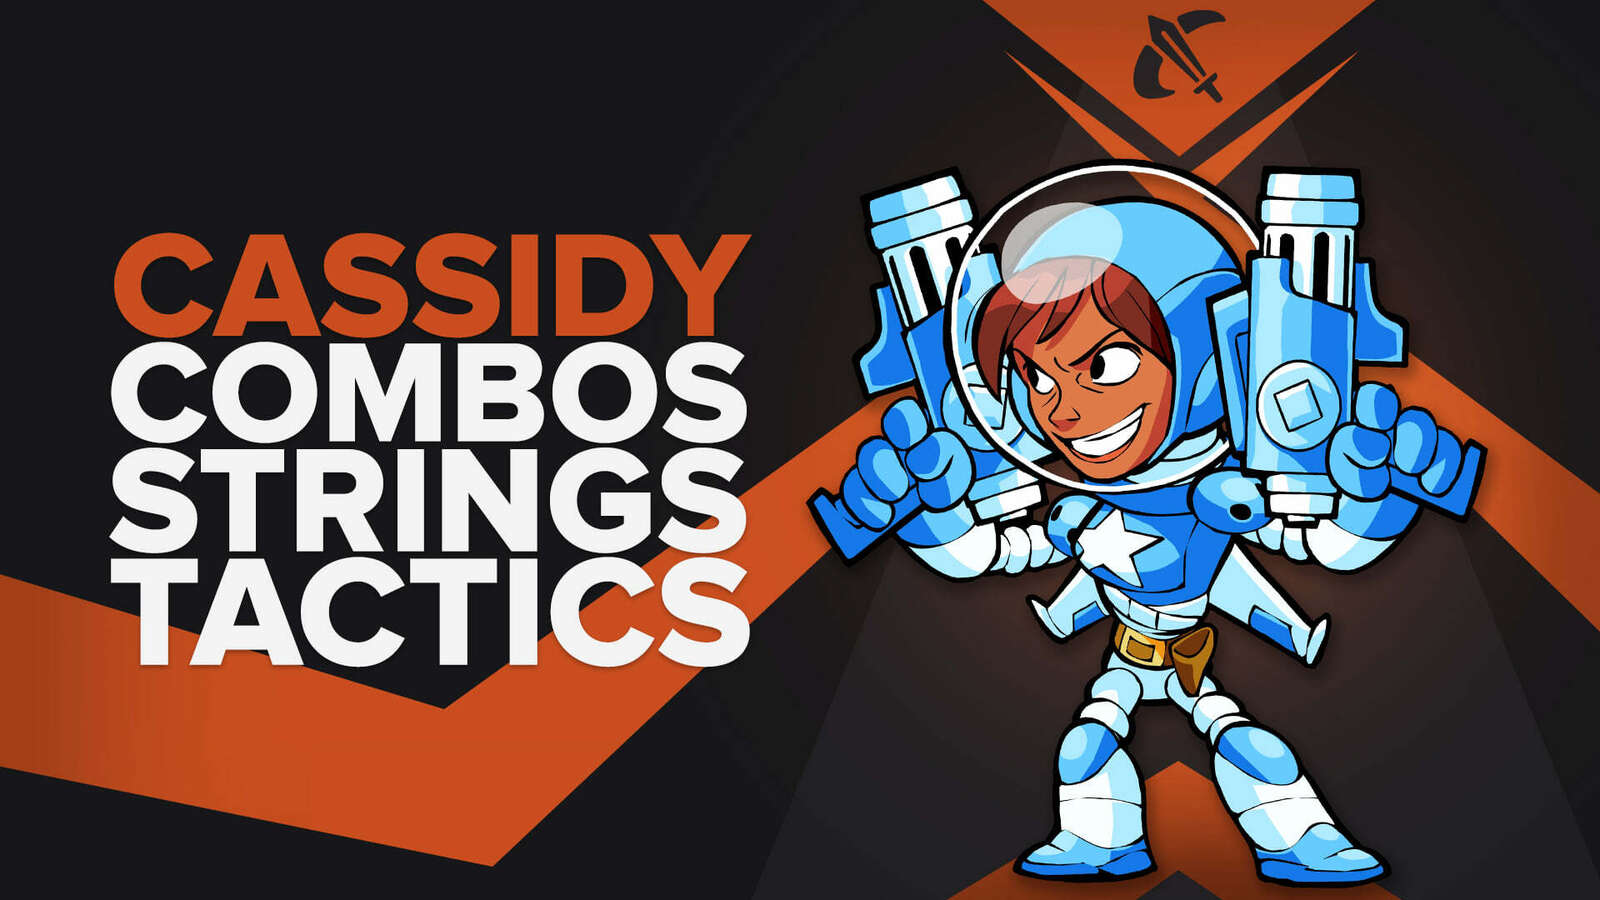 Best Cbuttidy combos, strings and tips in Brawlhalla